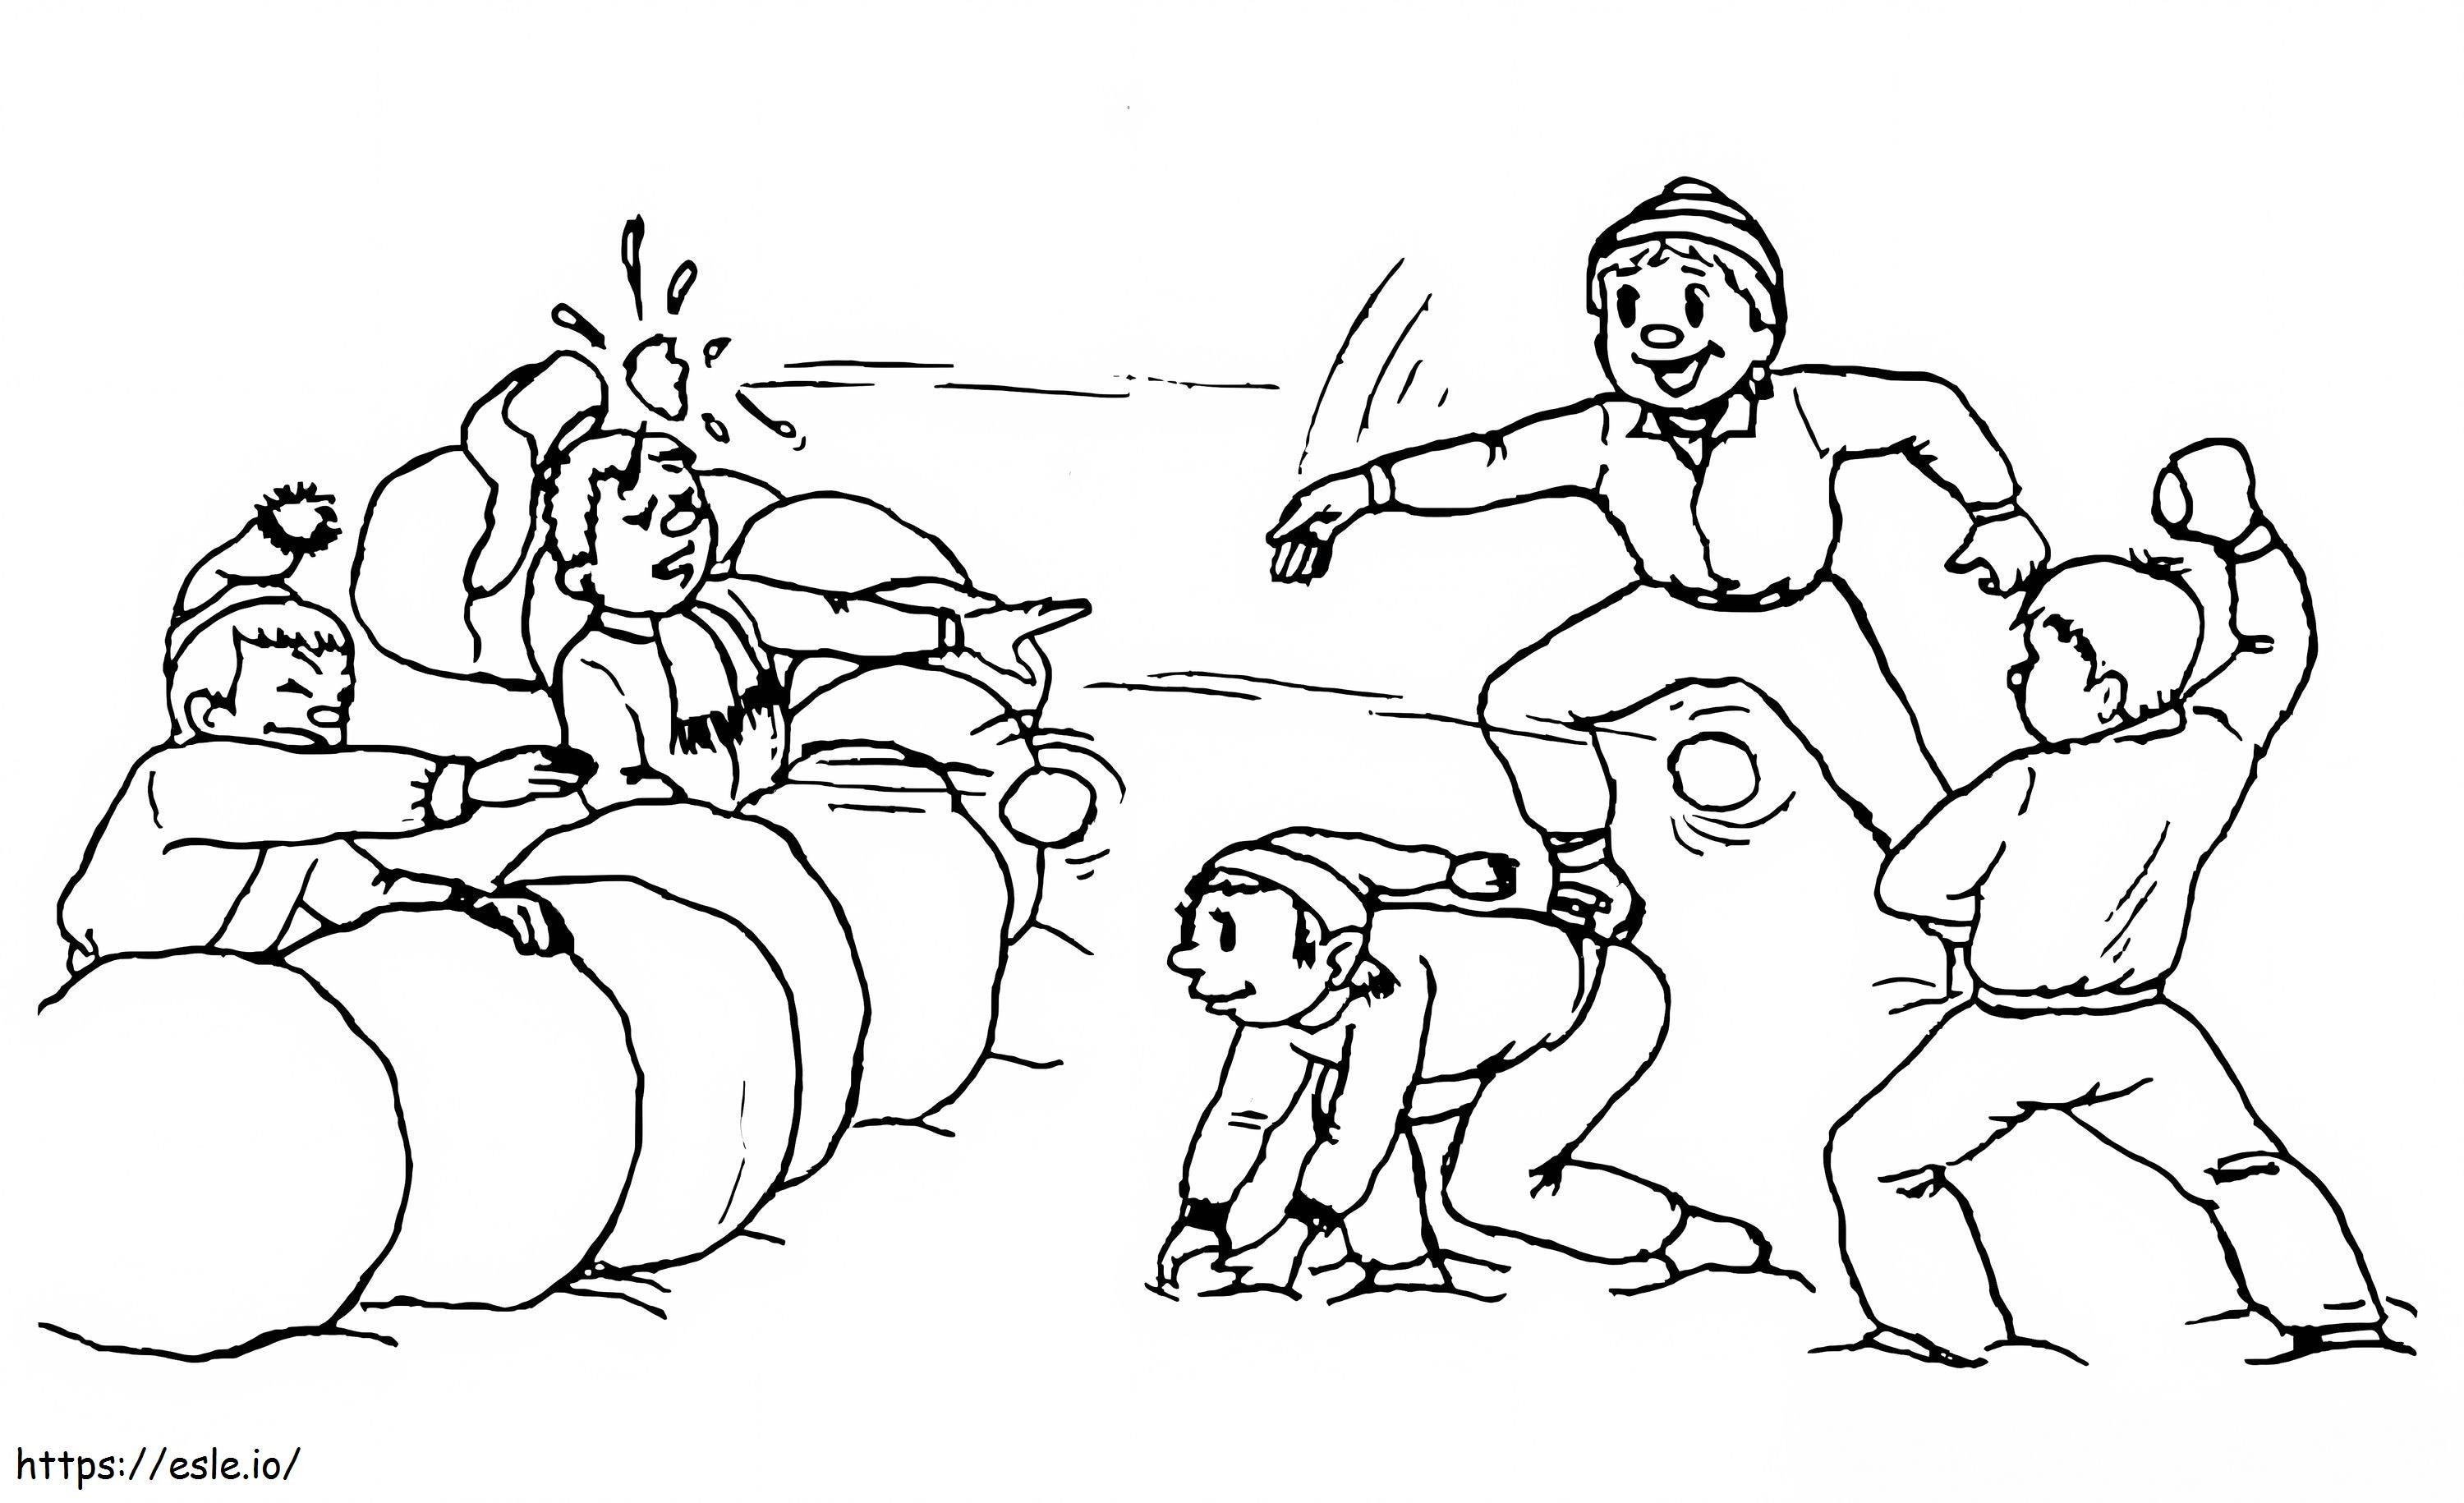 Snowball Fight Printable coloring page